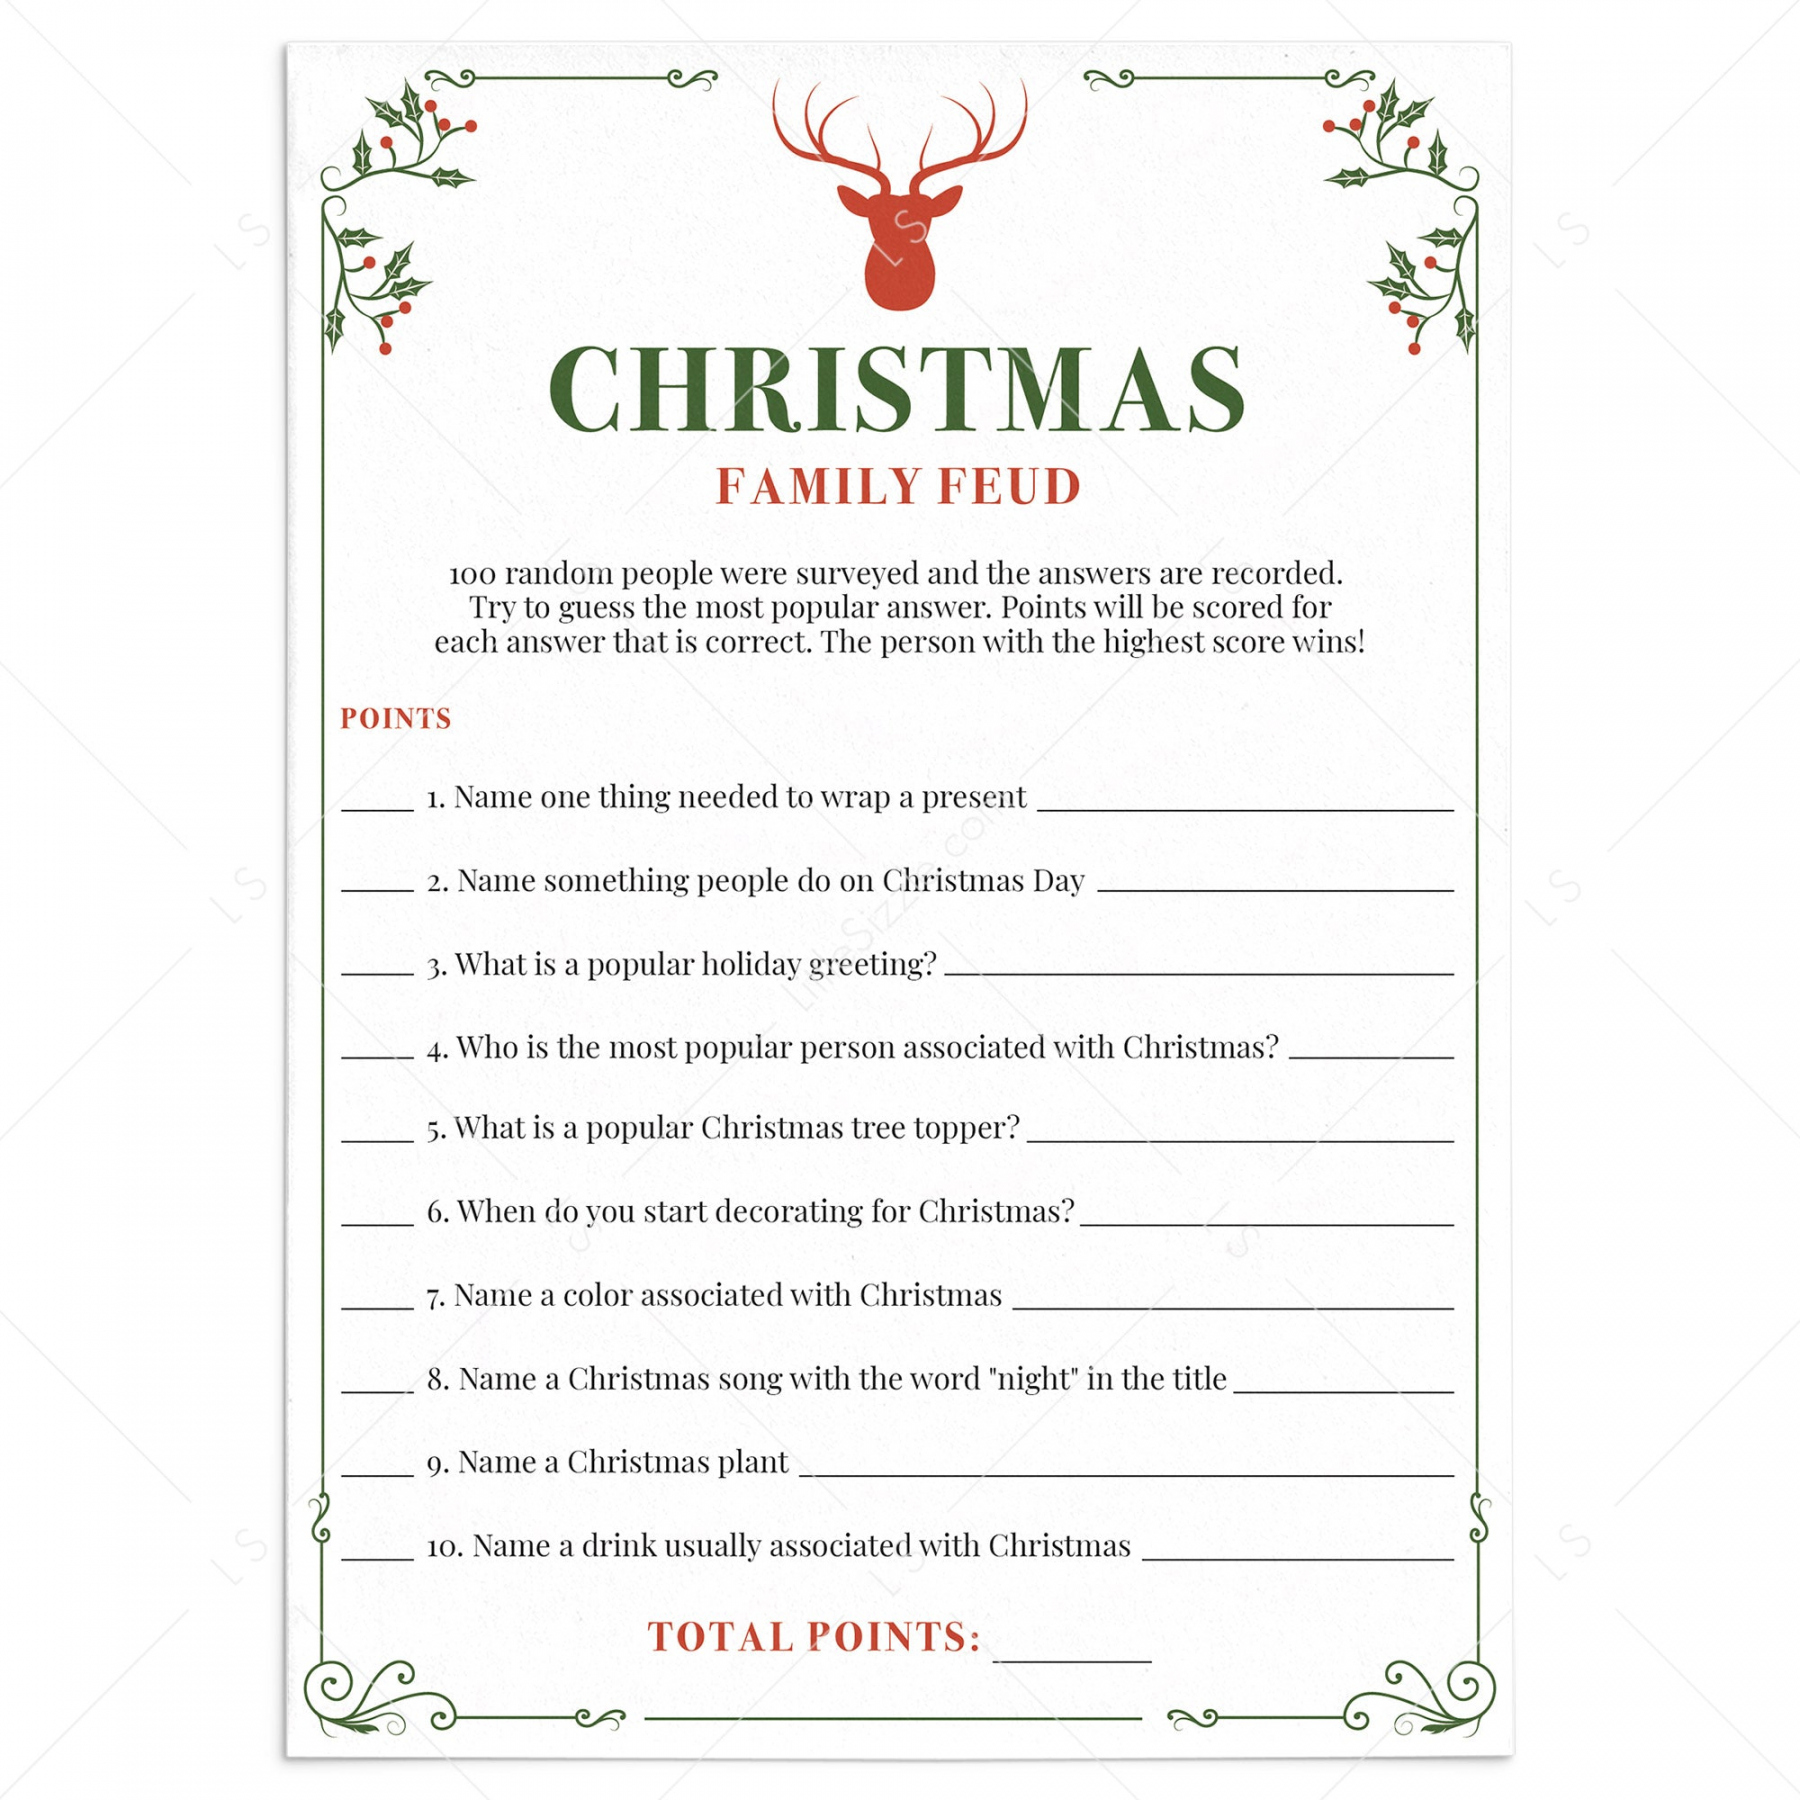 Christmas Family Feud Game Questions and Answers Printable - FREE Printables - Free Printable Christmas Family Feud Questions And Answers